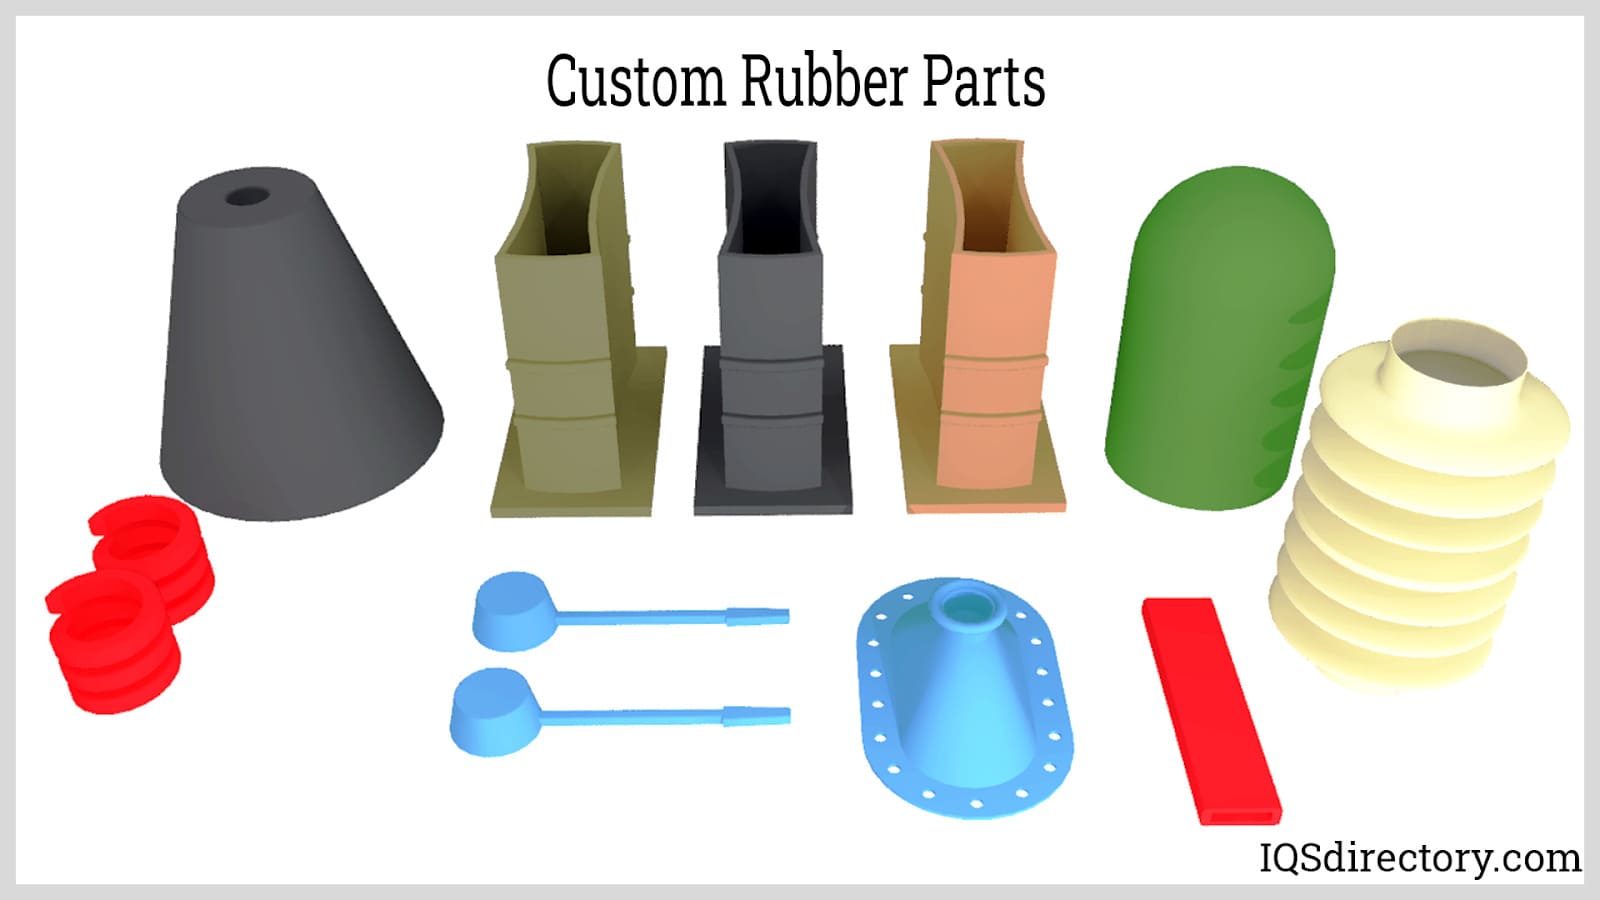 What to Know About Natural Rubber - Industrial Rubber Parts